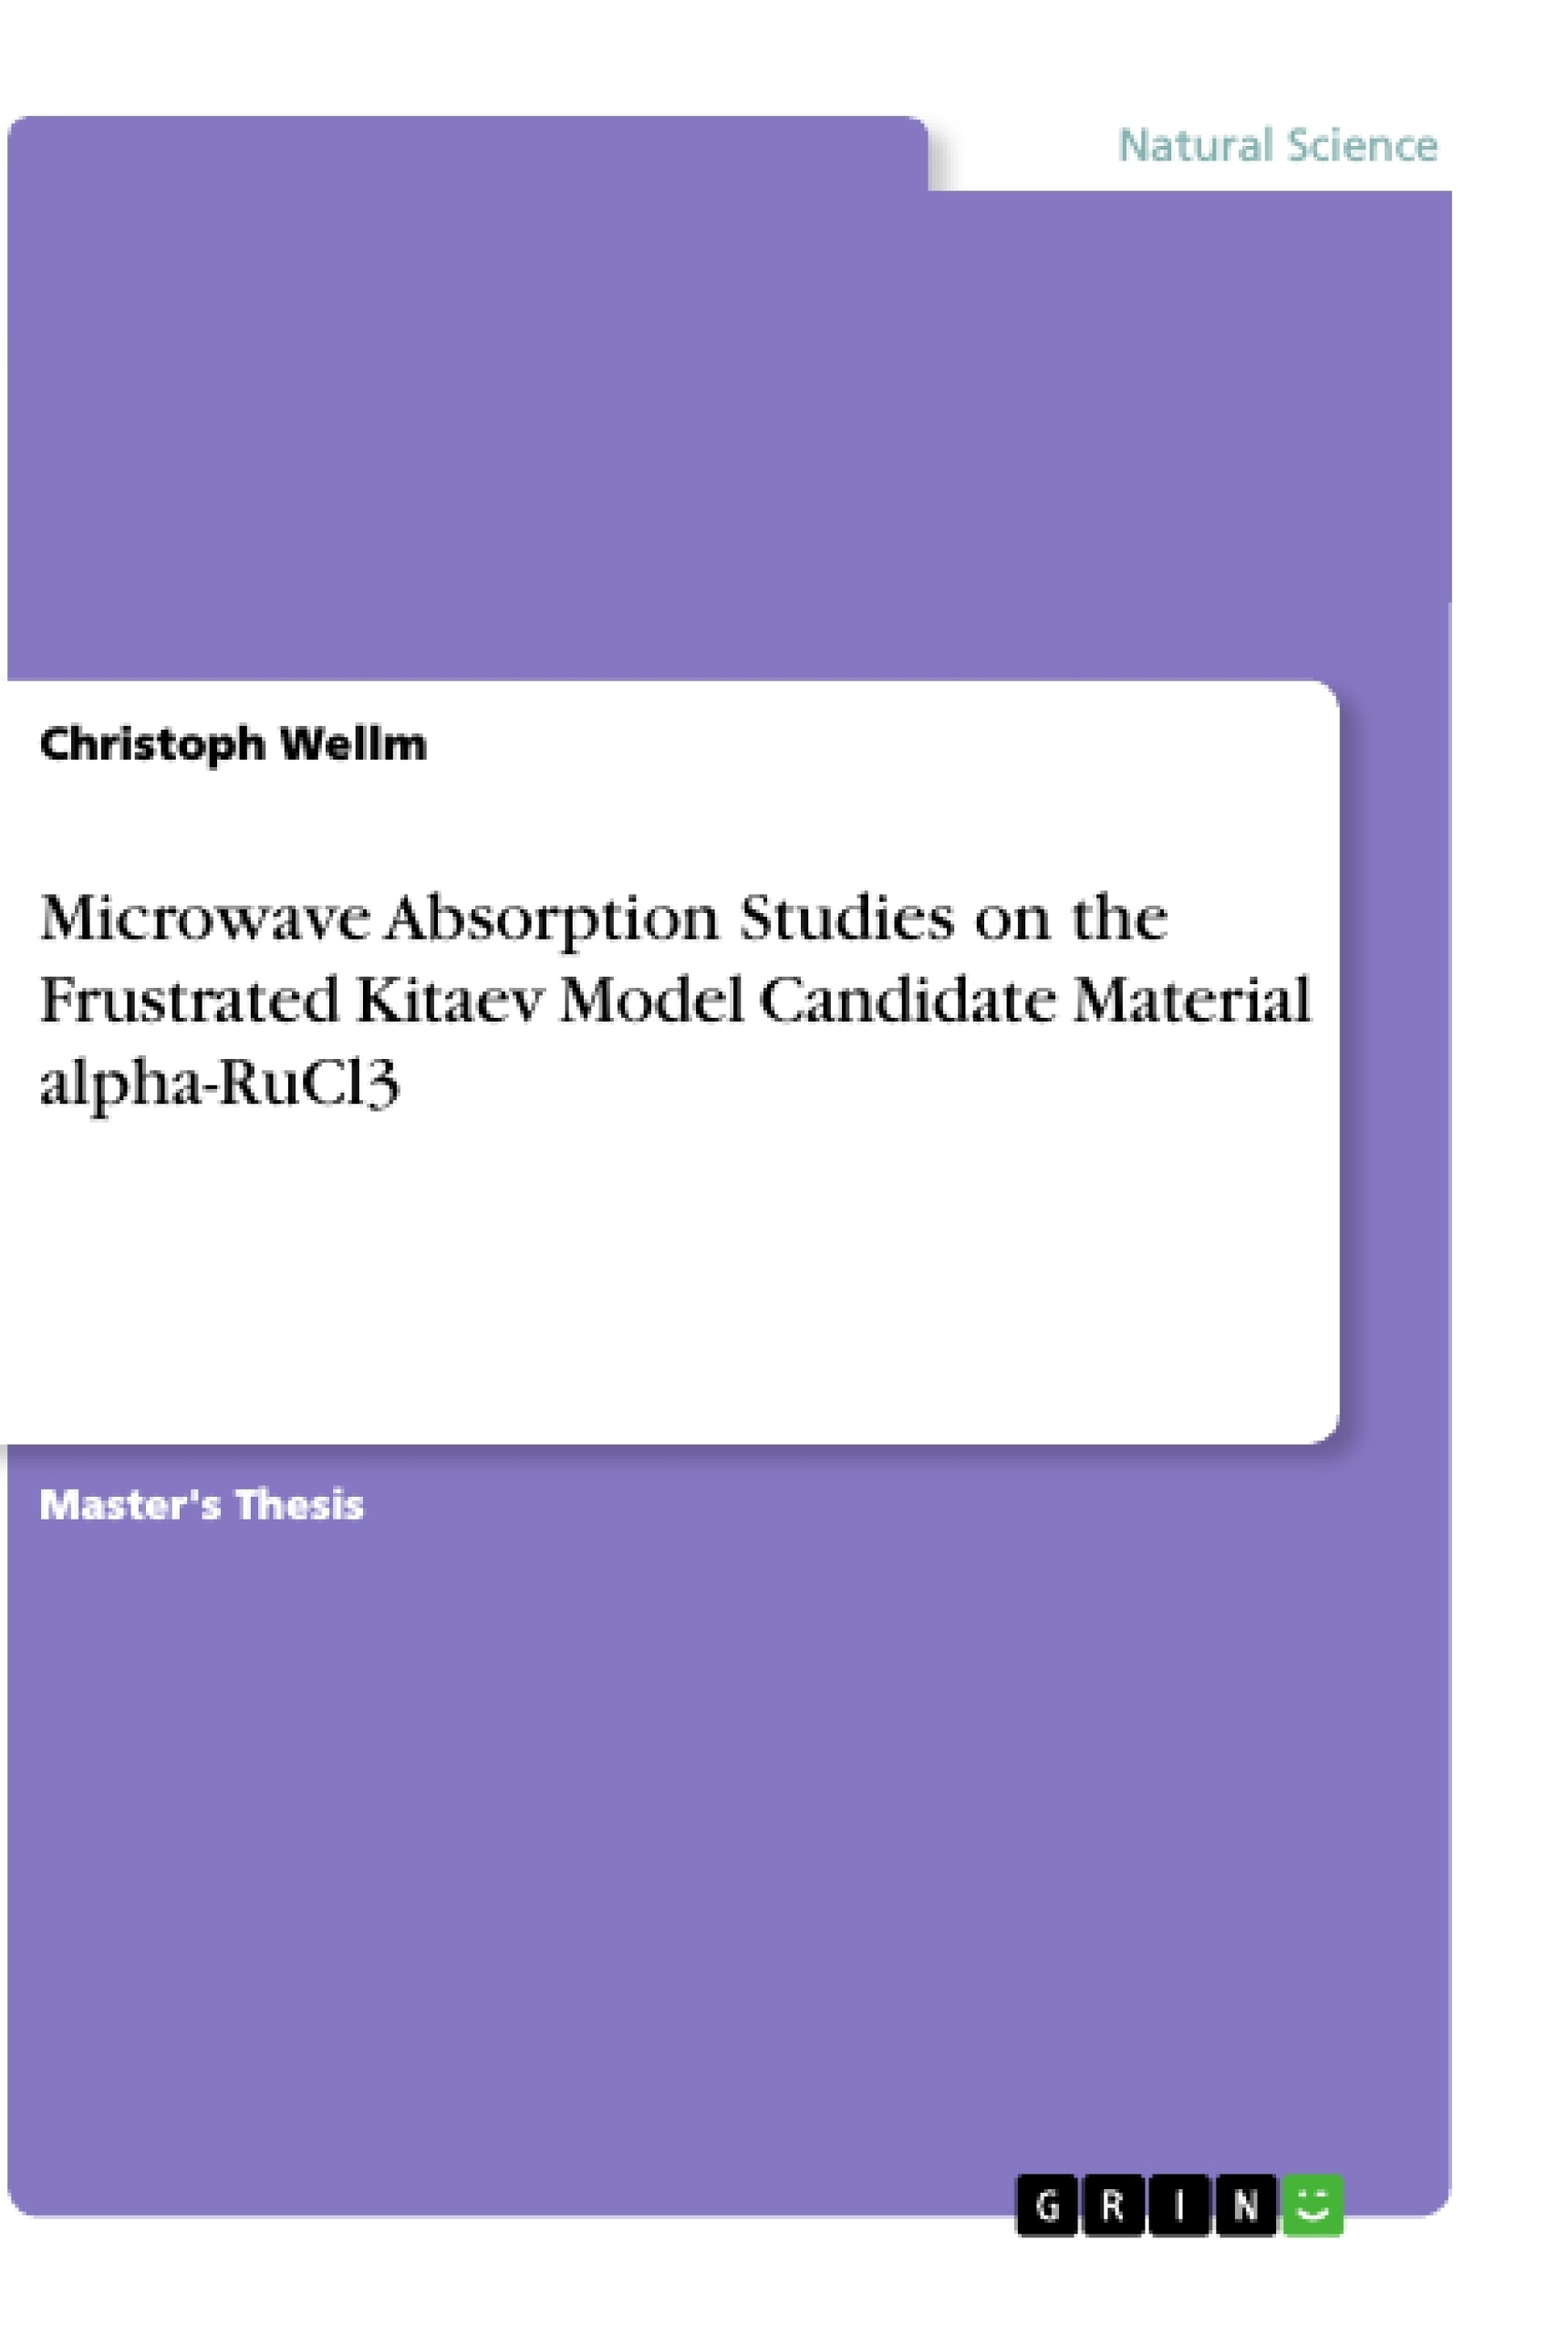 Titel: Microwave Absorption Studies on the Frustrated Kitaev Model Candidate Material alpha-RuCl3